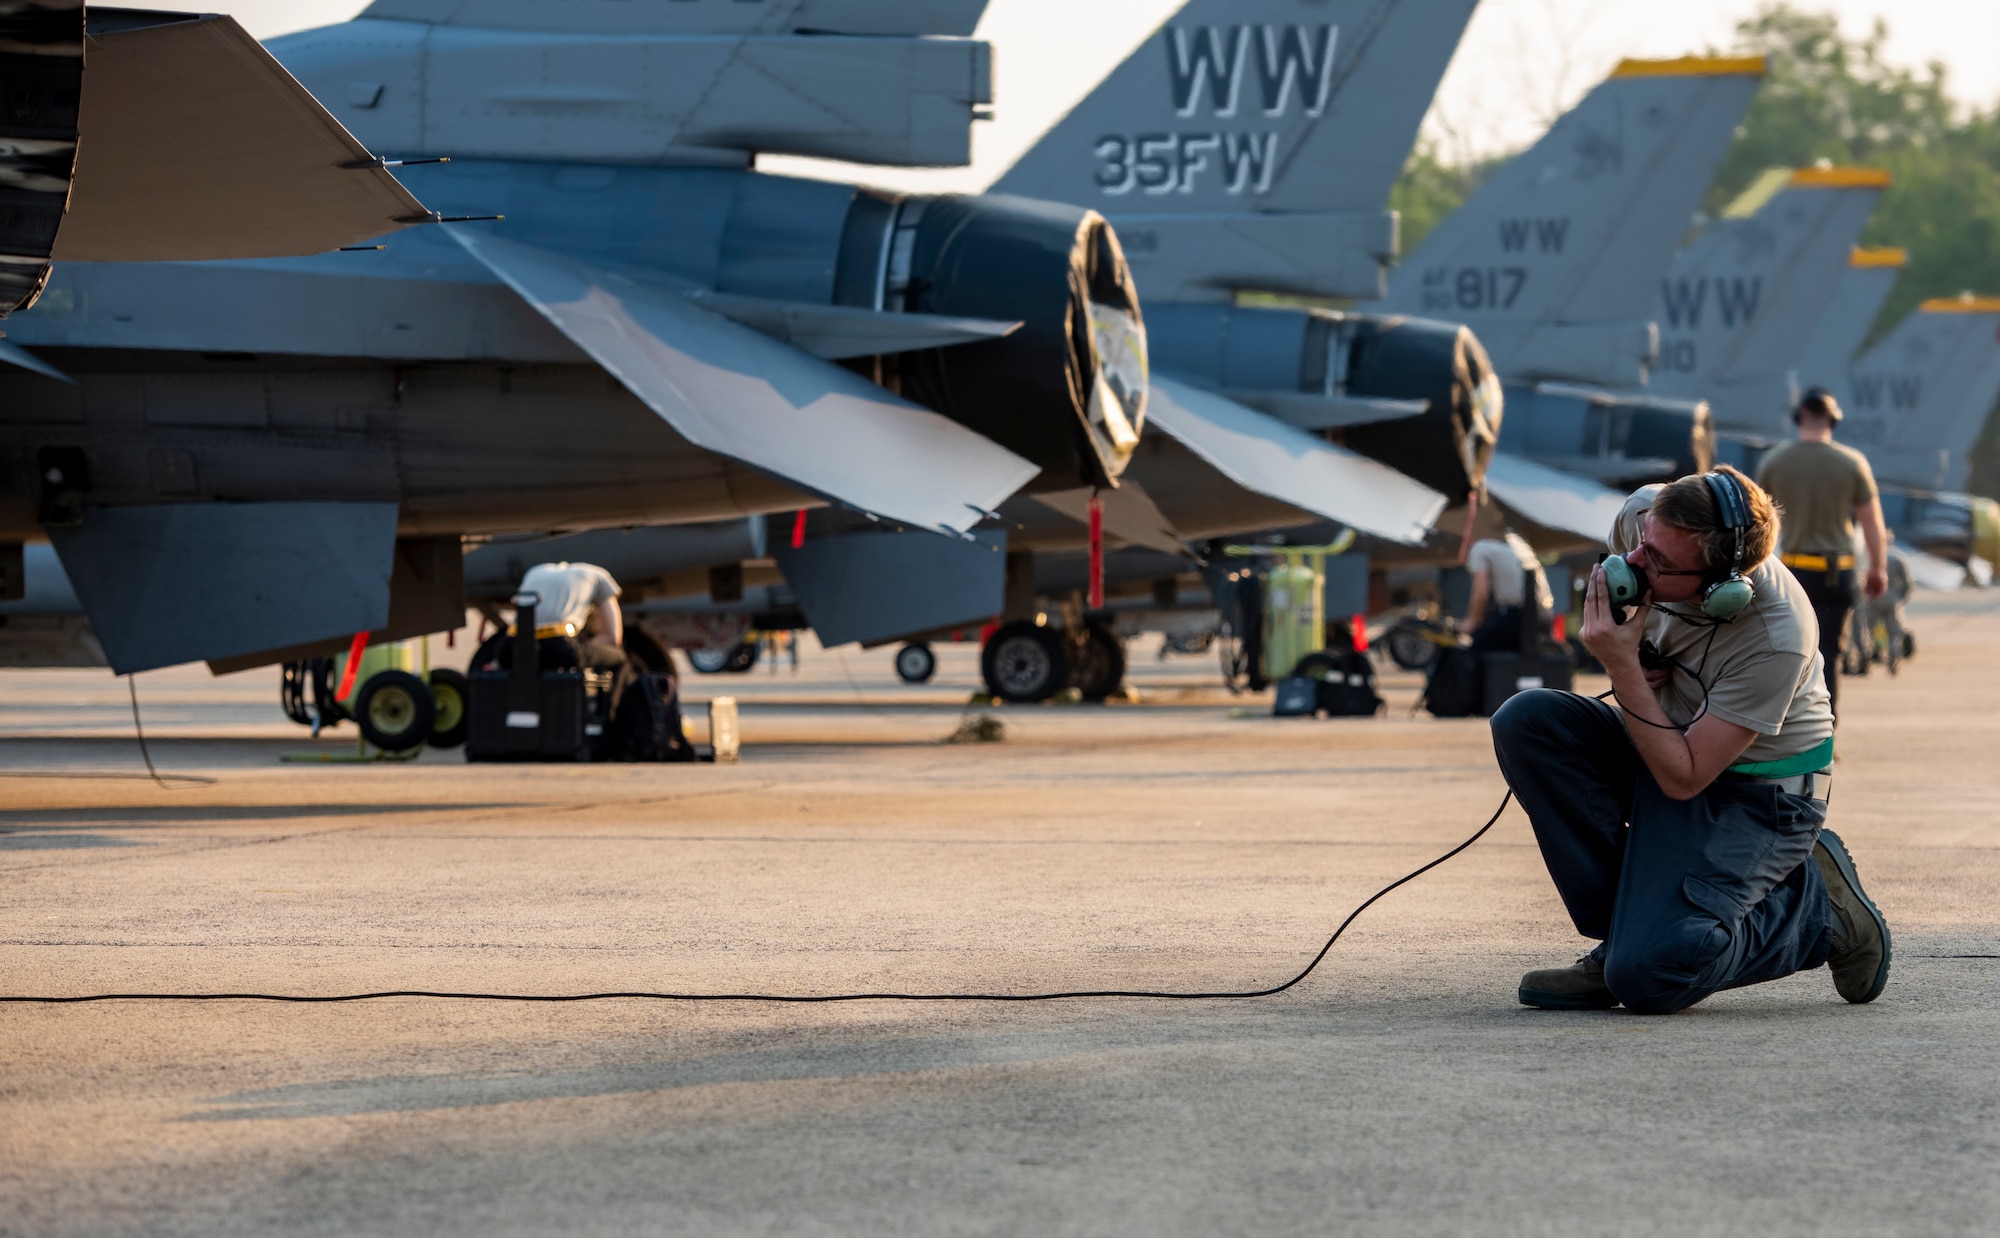 U. S. Air Force Airman 1st Class Kalle Hougaard, 35th Aircraft Maintenance Squadron crew chief performs a pre-flight inspection during COPE Tiger 2019 at Korat Royal Thai Air Force Base, Thailand, March 11, 2019.